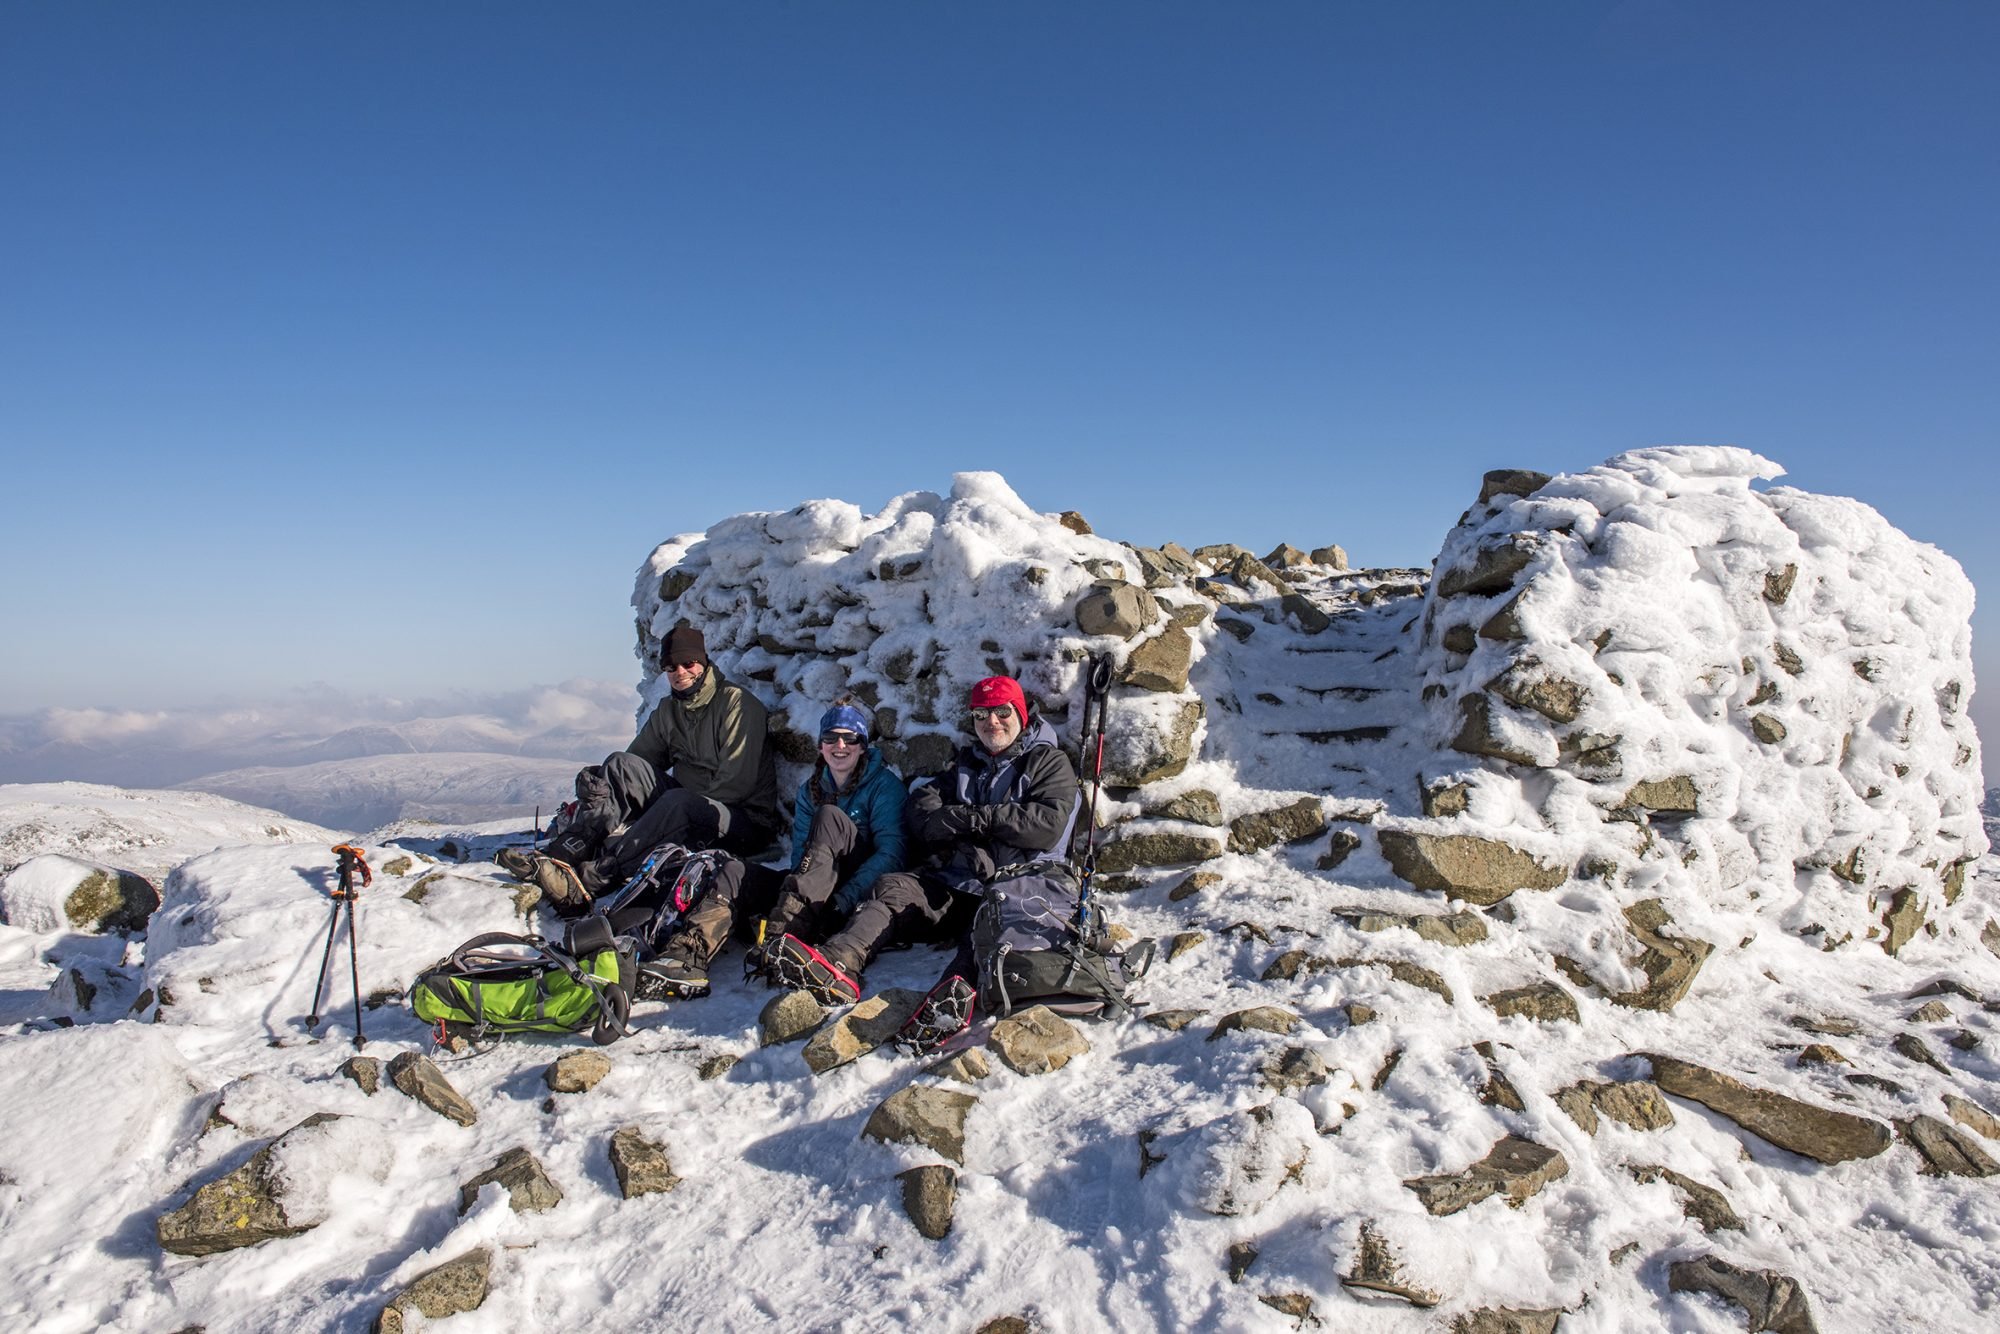 Hikers arrive at the top of Scafell Pike in winter, stop one of the three peak challenge